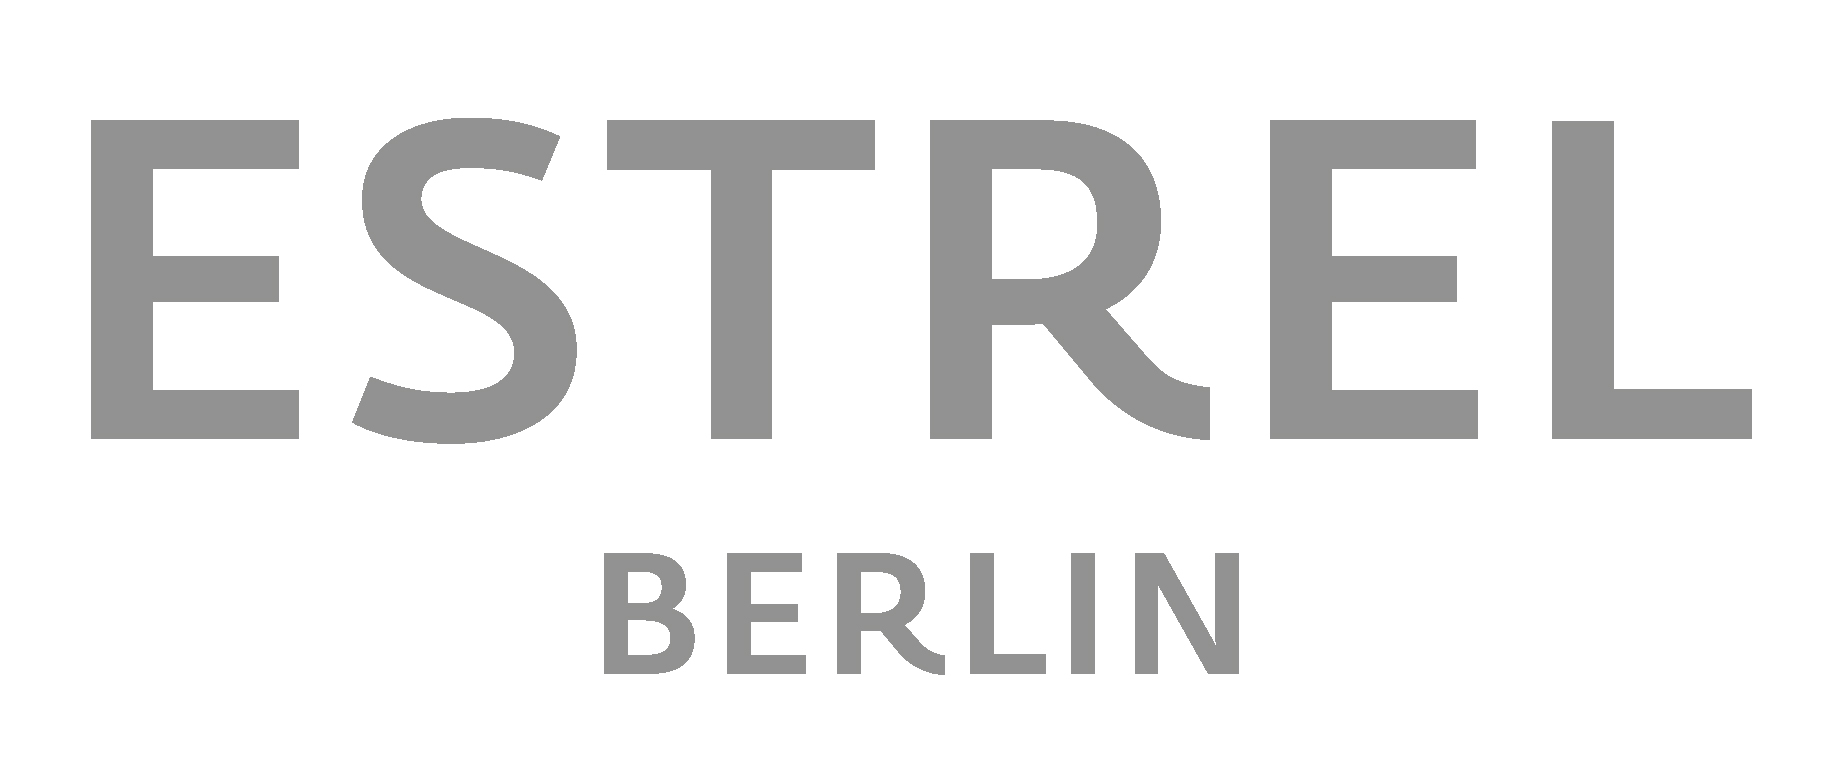 Taking Berlin to New Heights with the New Estrel Tower